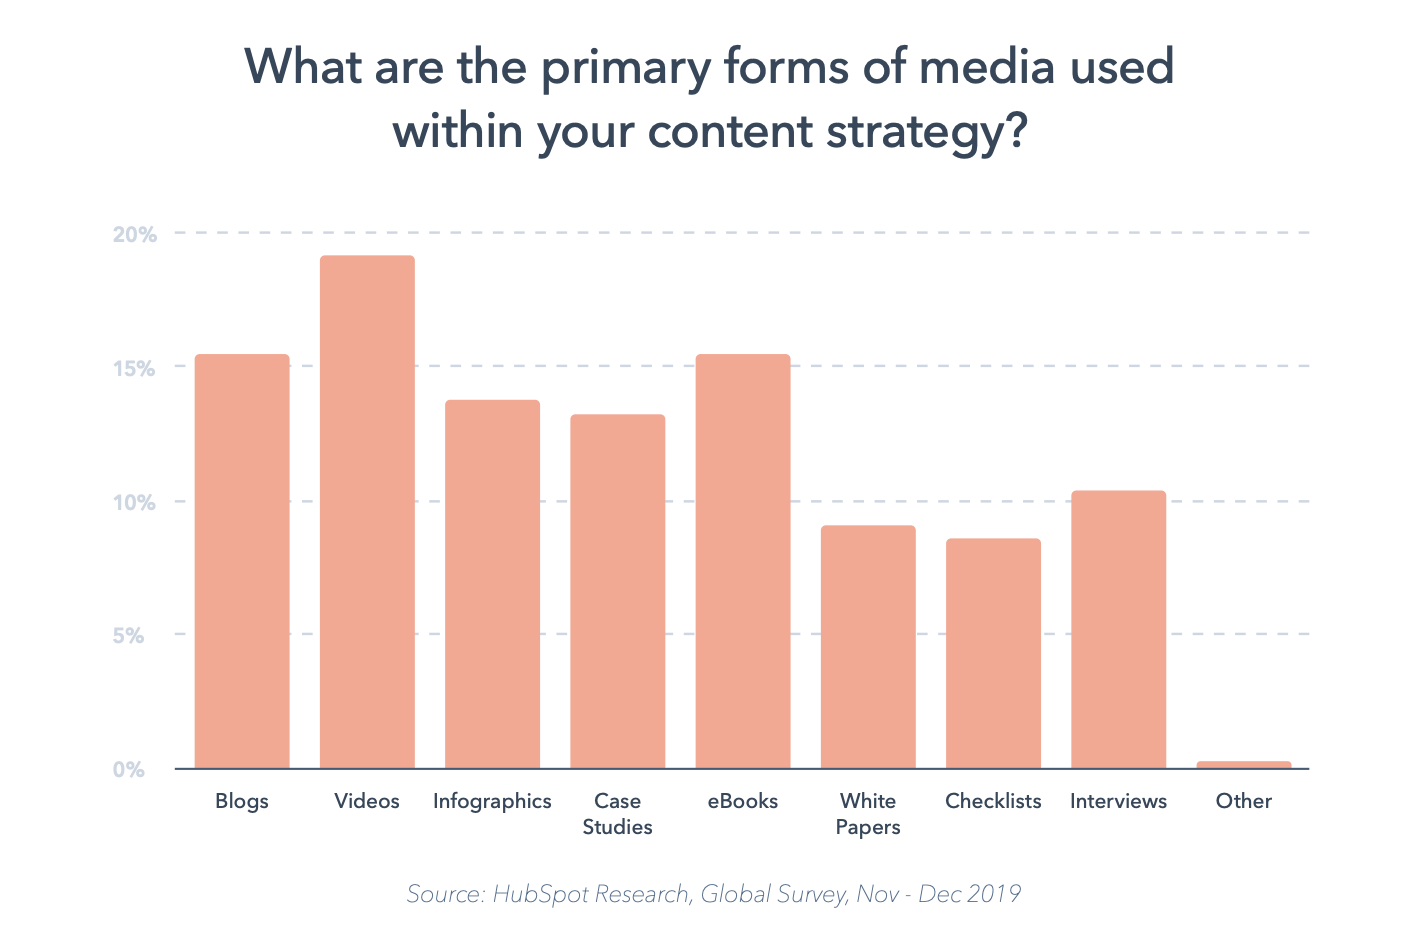 video is the #1 form of media used in content strategy